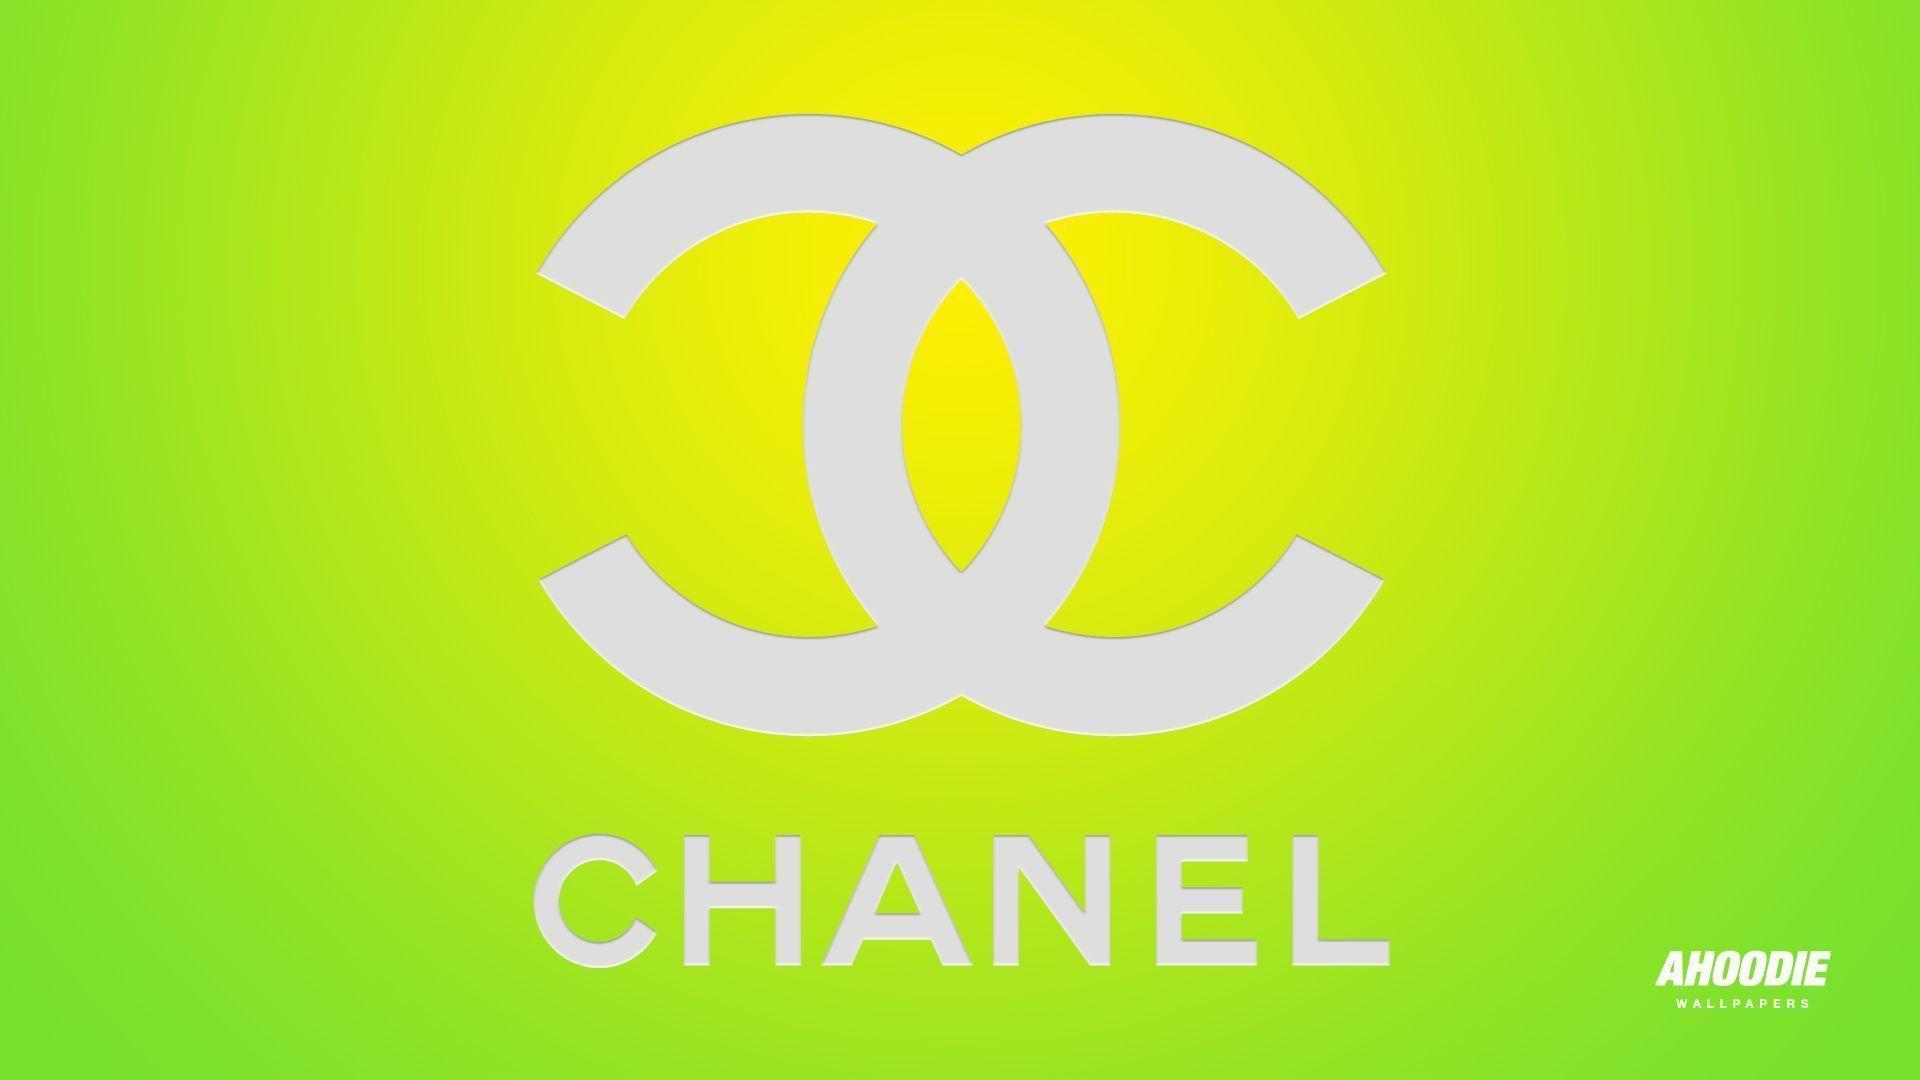 Logos For > Channel Fashion Logo Wallpapers